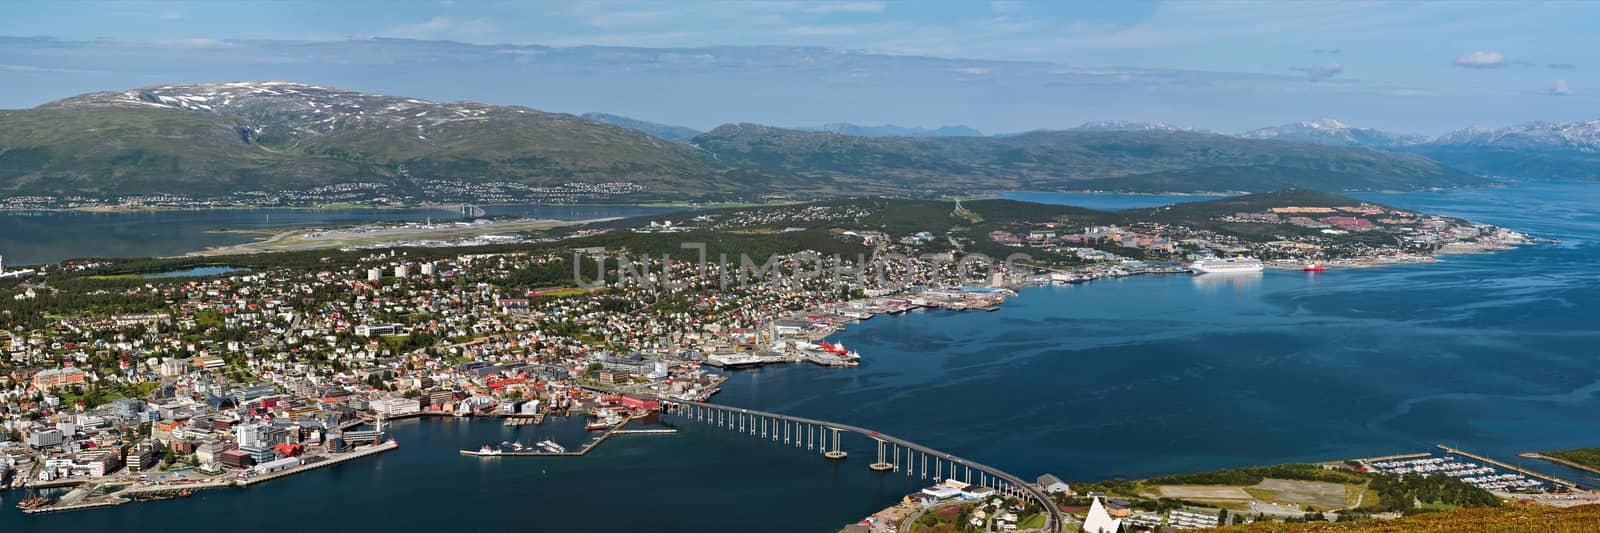 Panoramic view of Tromso and its port, Norway by LuigiMorbidelli